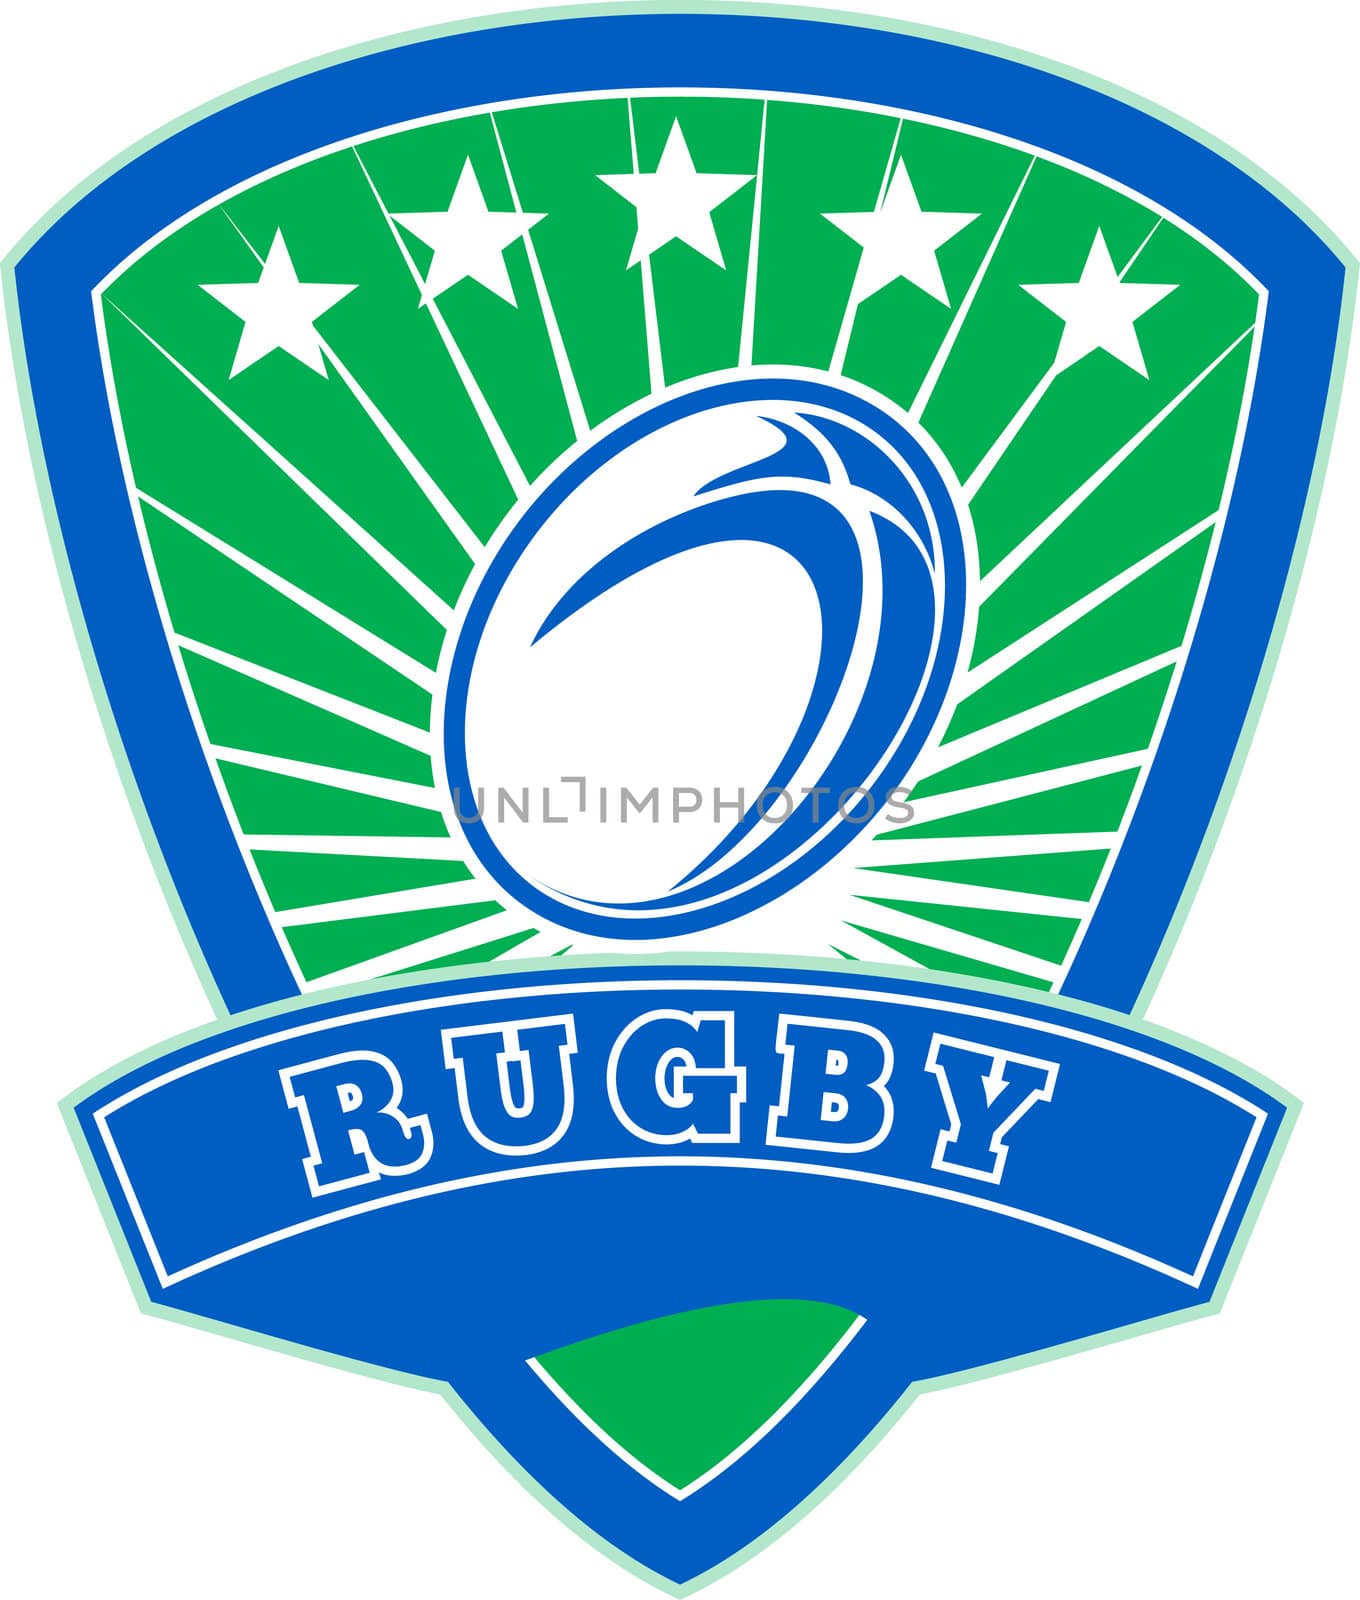 rugby ball with stars shield by patrimonio